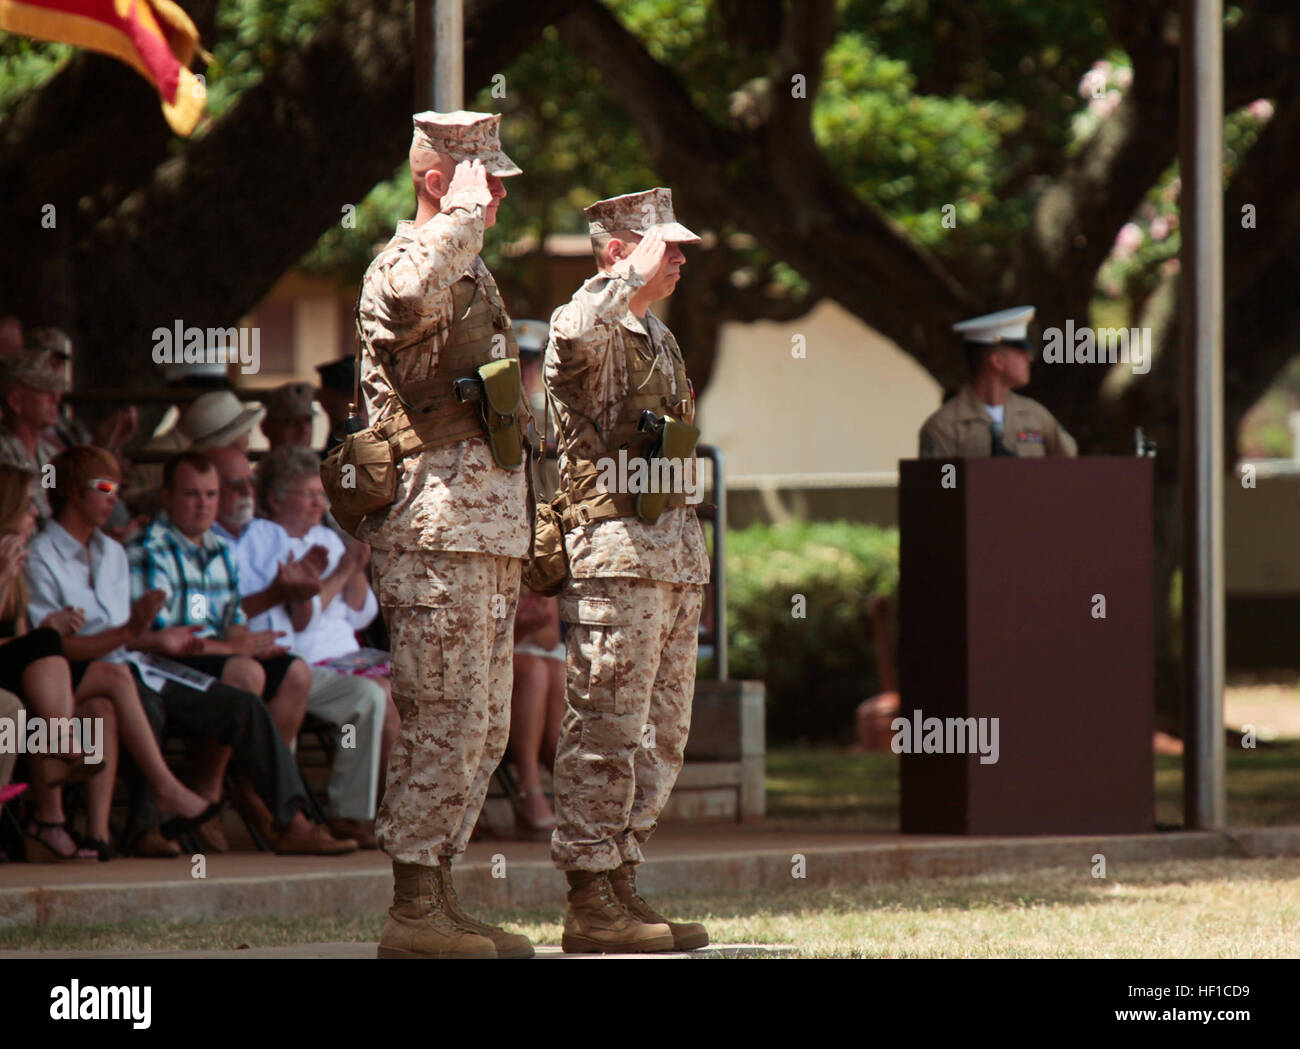 U.S. Marine Corps Colonel Timothy E. Winand, Commanding Officer of Third Marine Regiment, and Colonel Nathan I. Nastase, former Commanding Officer of 3rd Marine Regiment, render a salute as the pass and review goes on during 3rd Marine Regiment's change of command ceremony at Dewey Square, Marine Corps Base Hawaii, Kaneohe Bay on July 17th, 2013. The ceremony marked the passing of command between Colonel Nastase and Colonel Winand. (U.S. Marine Corps photo by Private 1st Class Roberto Villa Jr./Released) Third Marine Regiment Change of Command 130717-M-BN443-053 Stock Photo